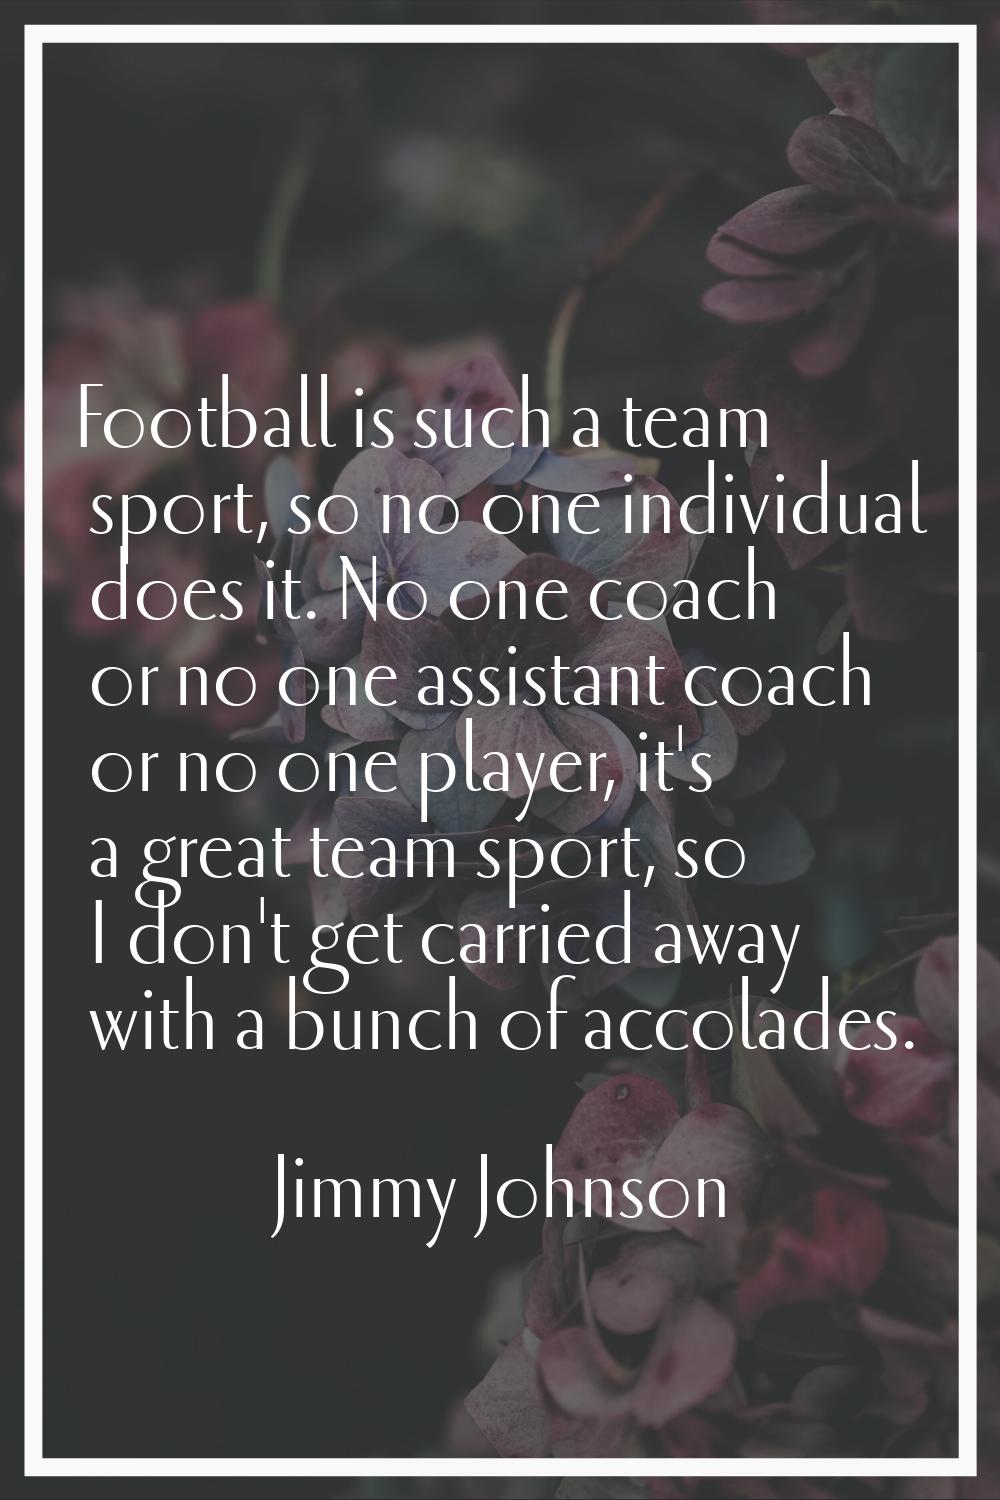 Football is such a team sport, so no one individual does it. No one coach or no one assistant coach